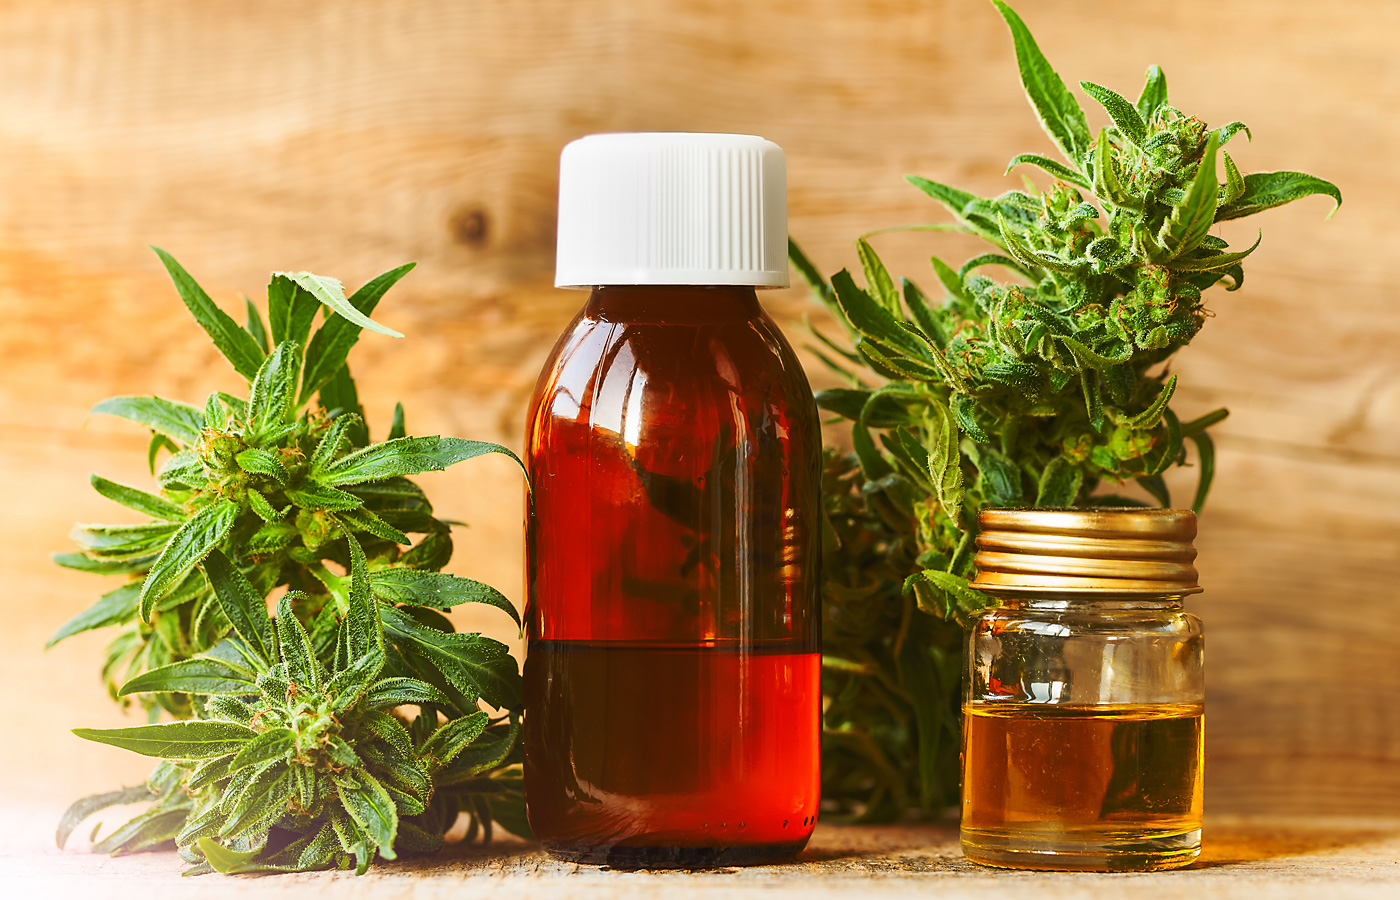 HOW TO USE CBD TINCTURES